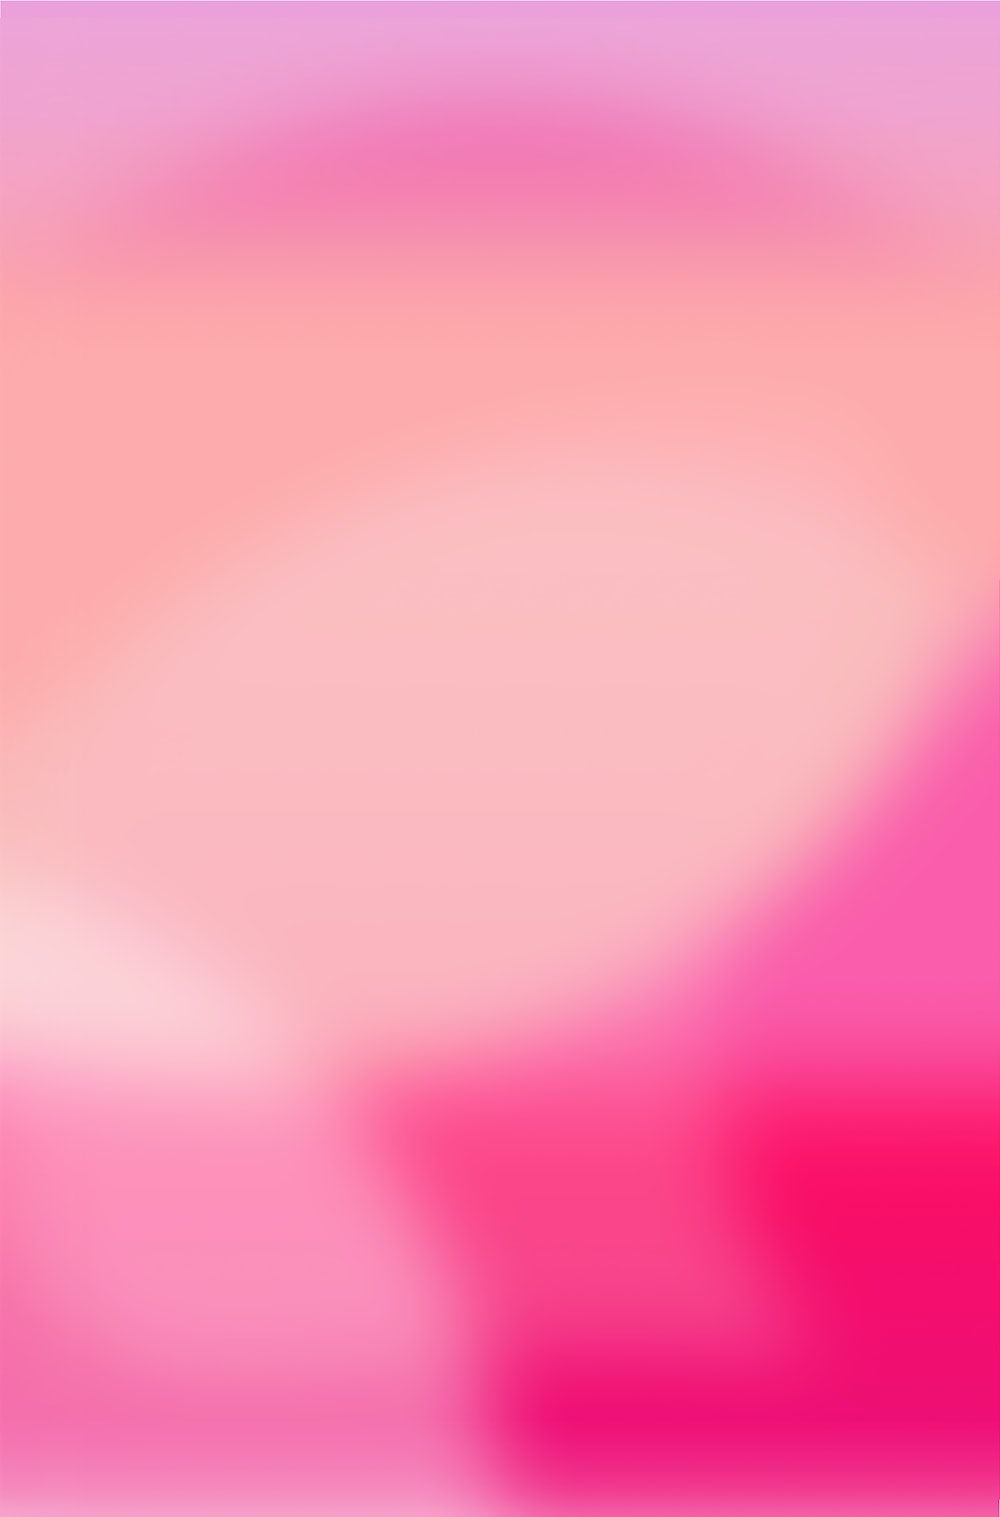 A soft pink and purple abstract image - Magenta